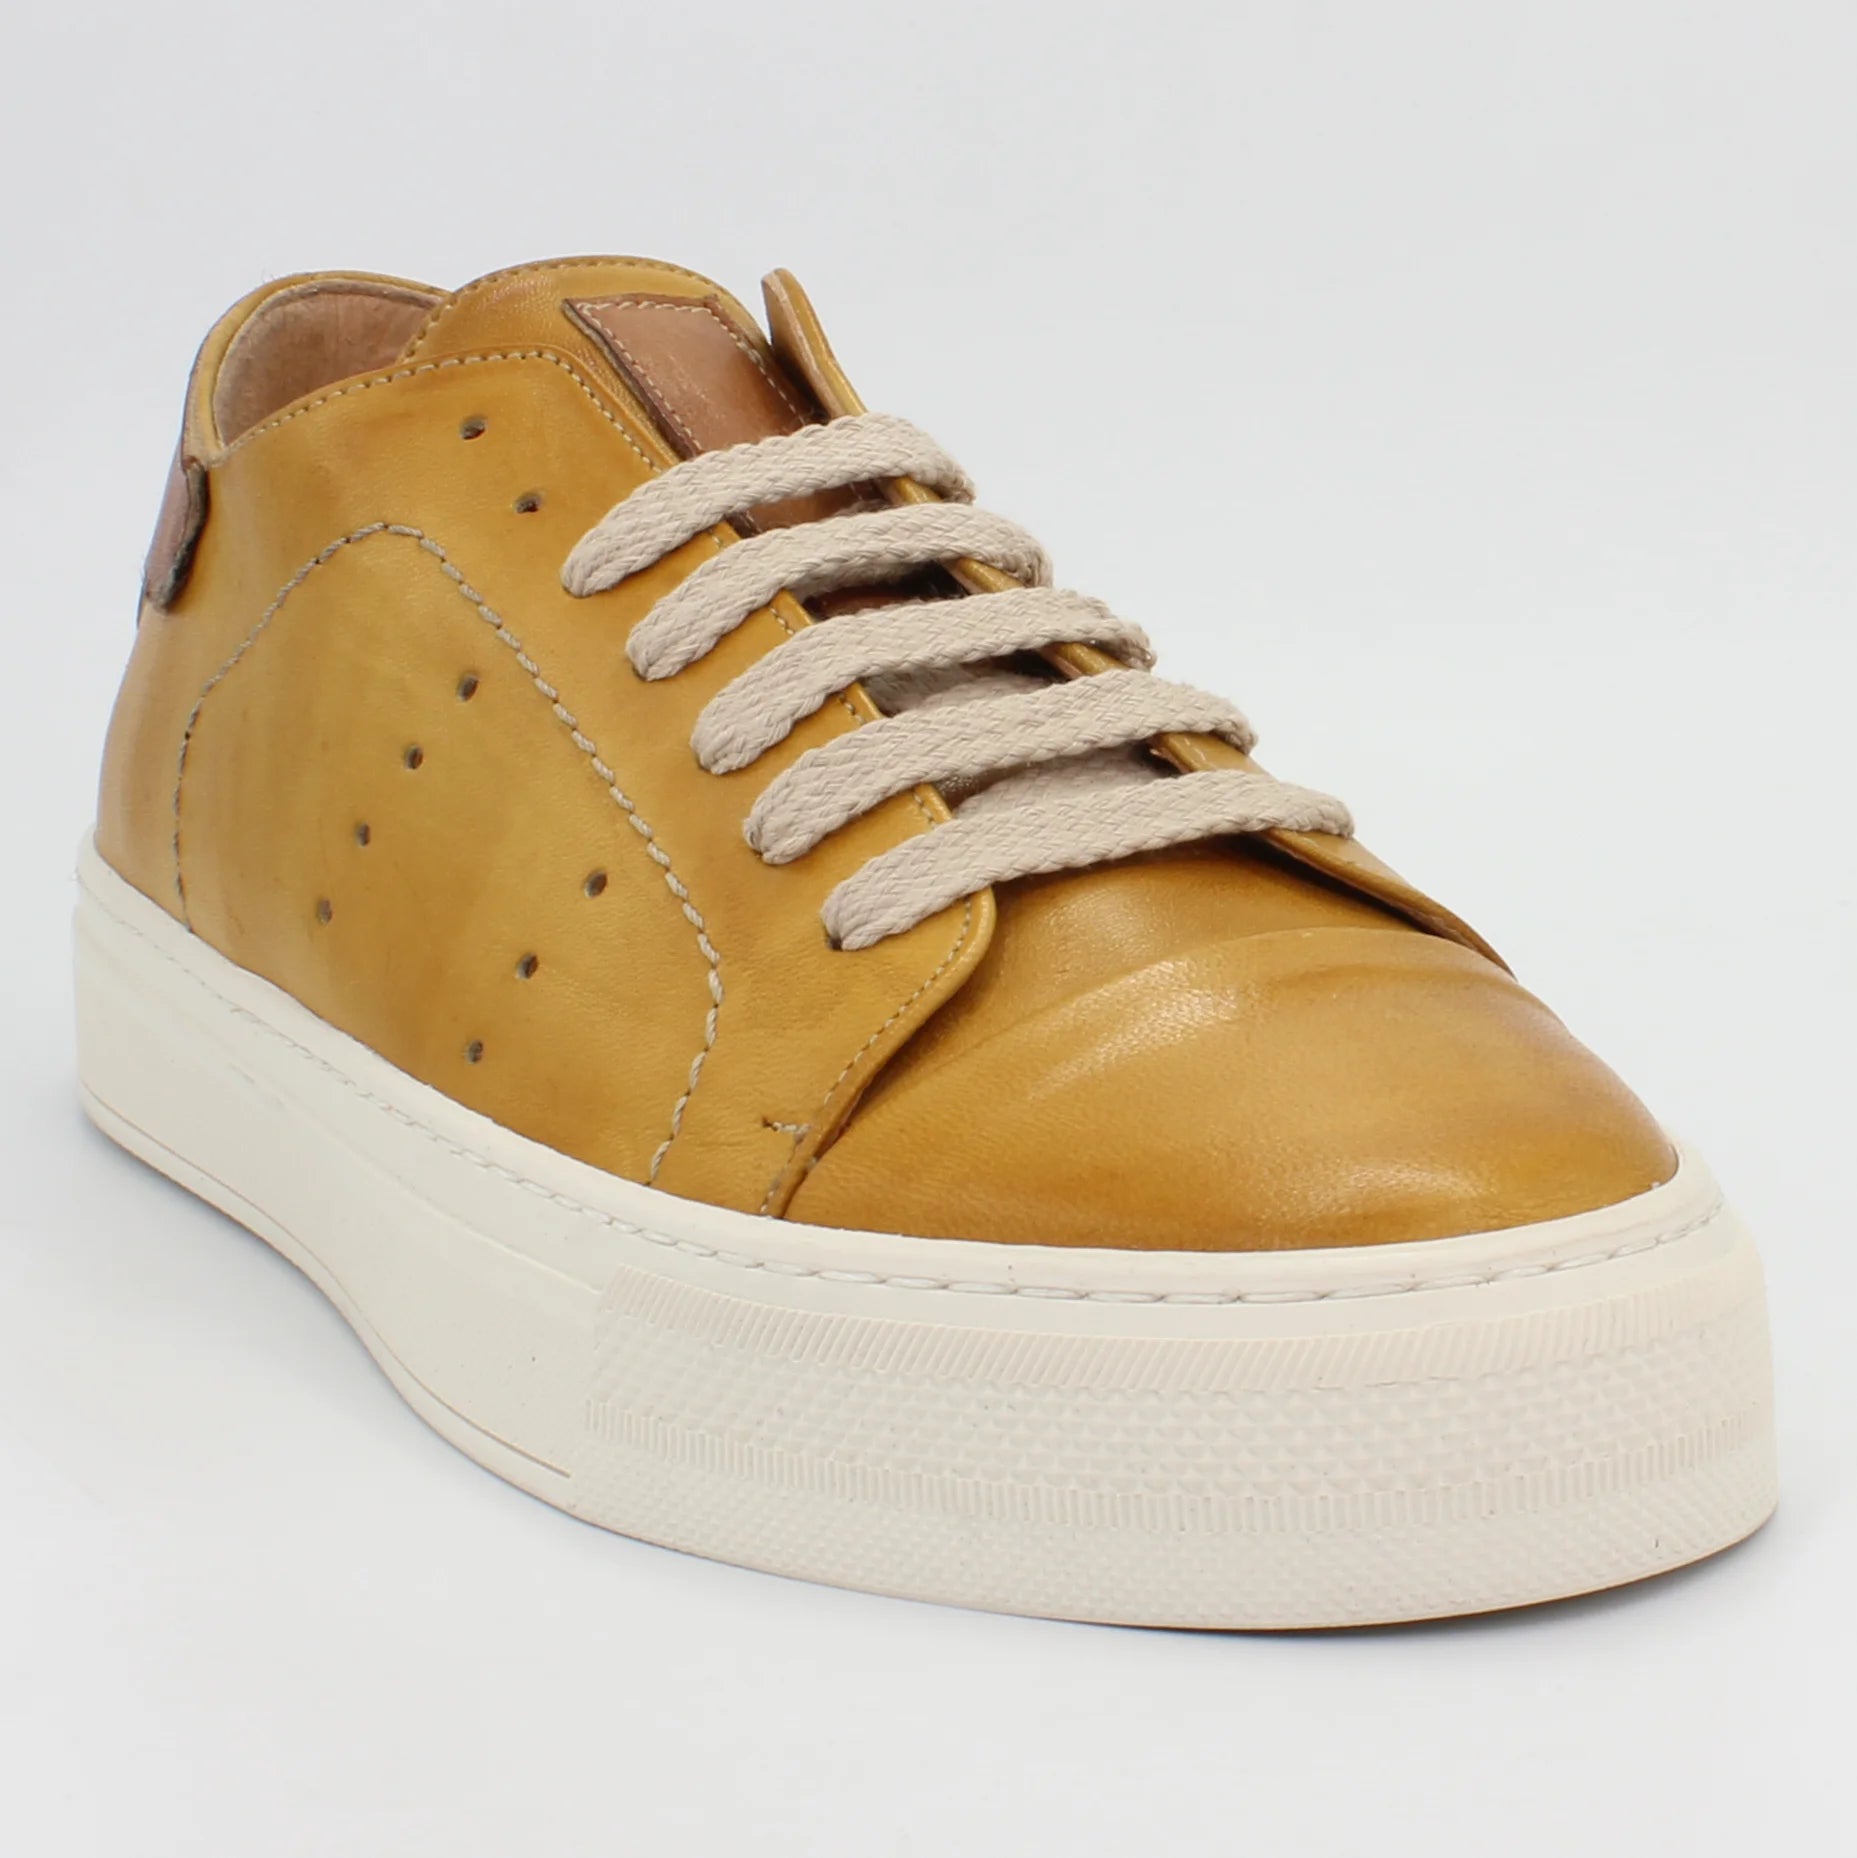 Shop Handmade Italian Leather sneaker in mustang (GR3103) or browse our range of hand-made Italian shoes for men in leather or suede in-store at Aliverti Cape Town, or shop online. We deliver in South Africa & offer multiple payment plans as well as accept multiple safe & secure payment methods.